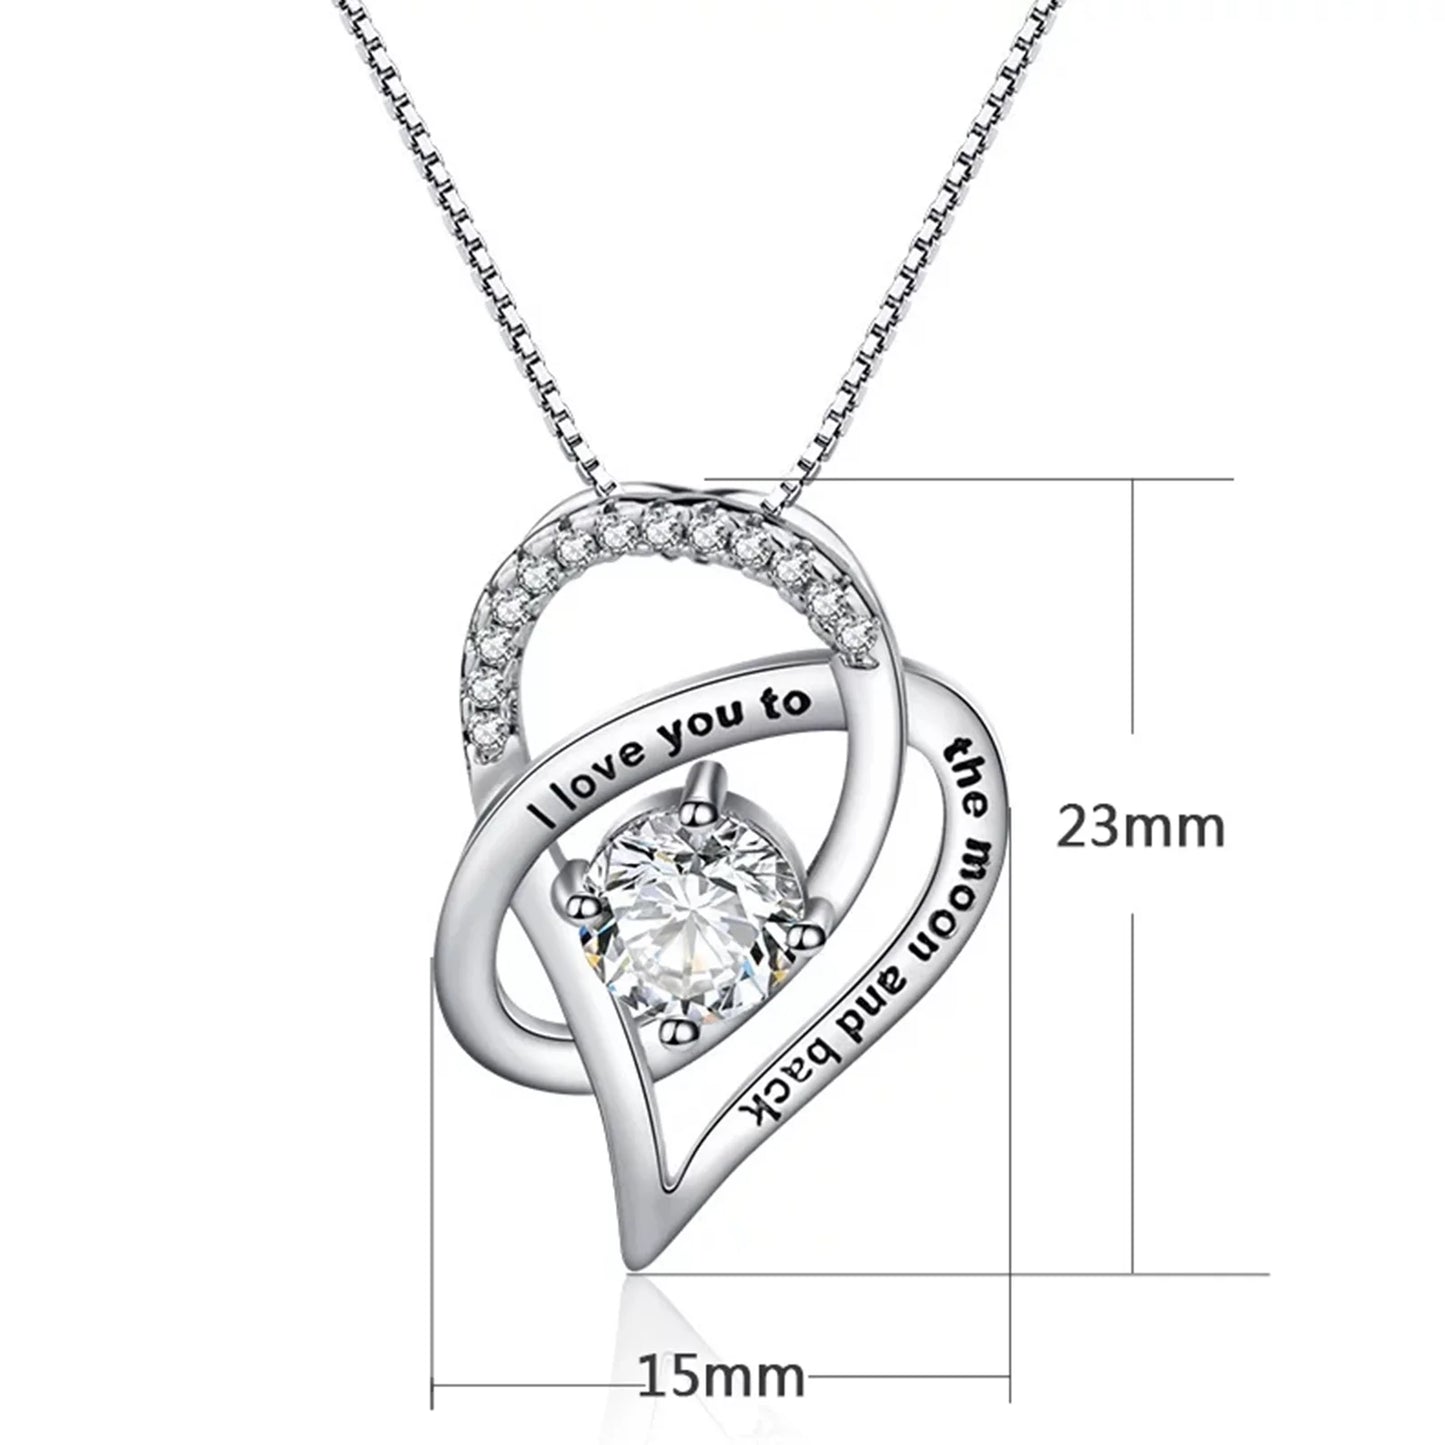 Gifts for Mom Preserved Real Rose with Necklace Gift Set, Sterling Silver Love Heart Cubic Zircon Pendant Necklace with Gift Box and Card, Mothers Day/Birthday Gifts for Mom/To Be New Mom Gifts